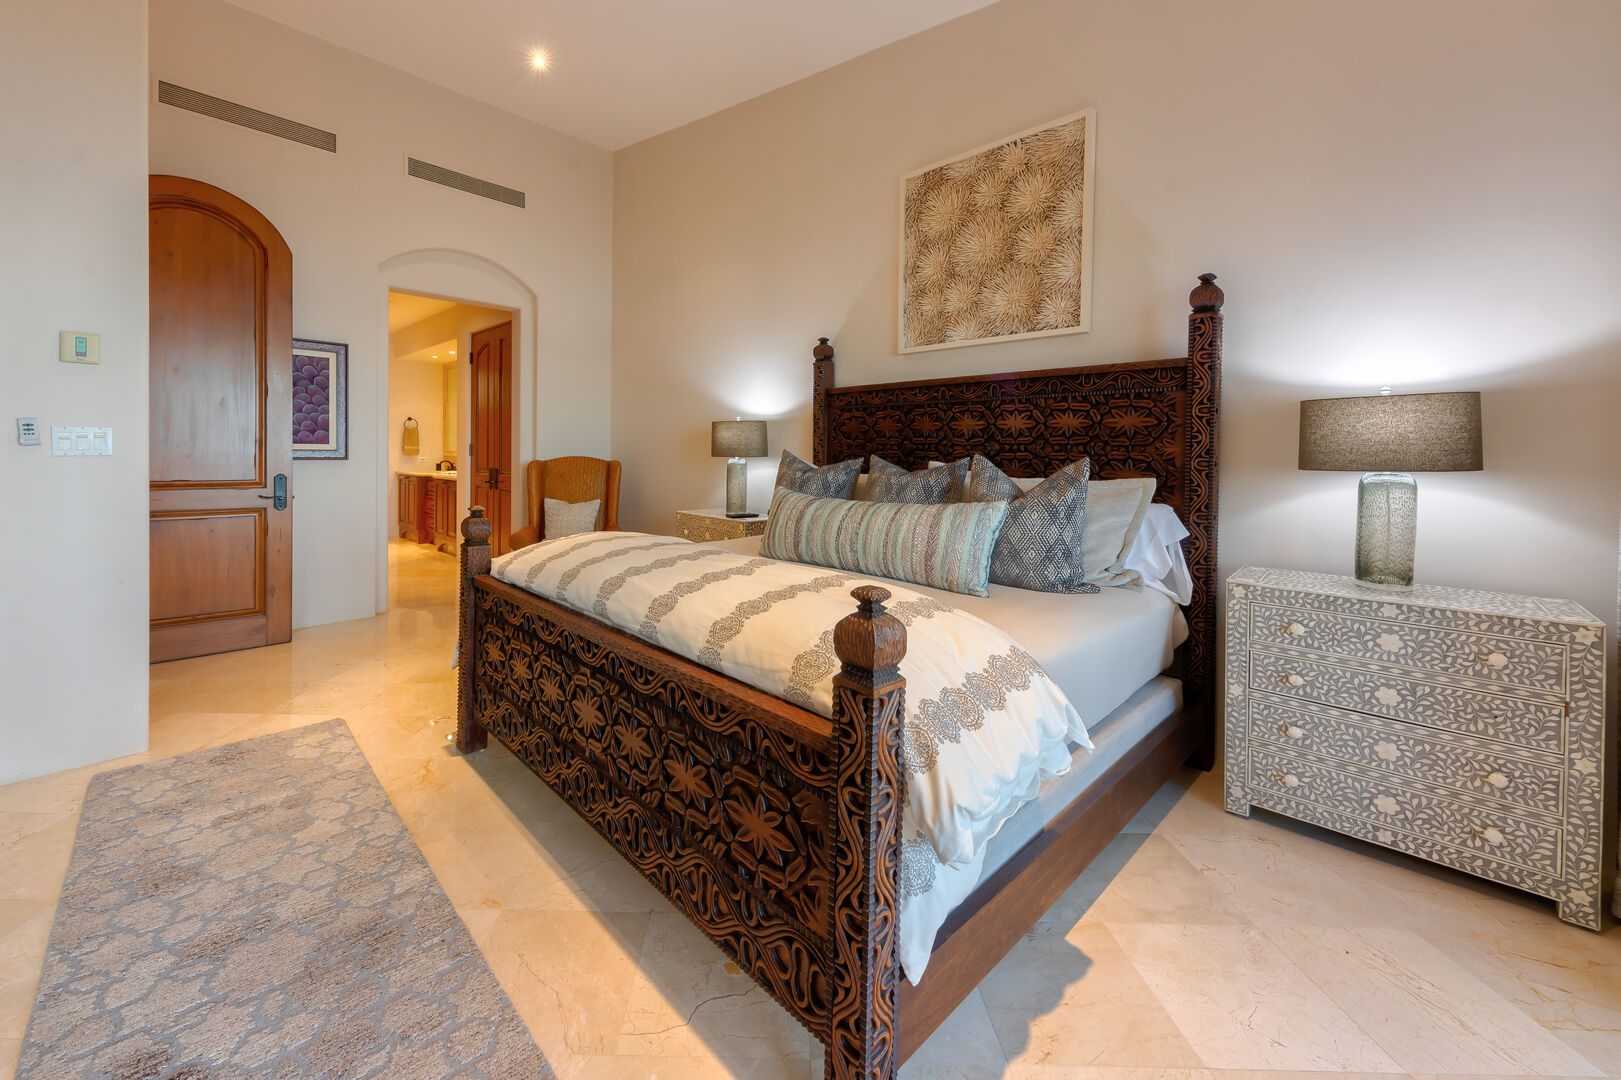 Third Master Bedroom with a king size bed and a nightstand